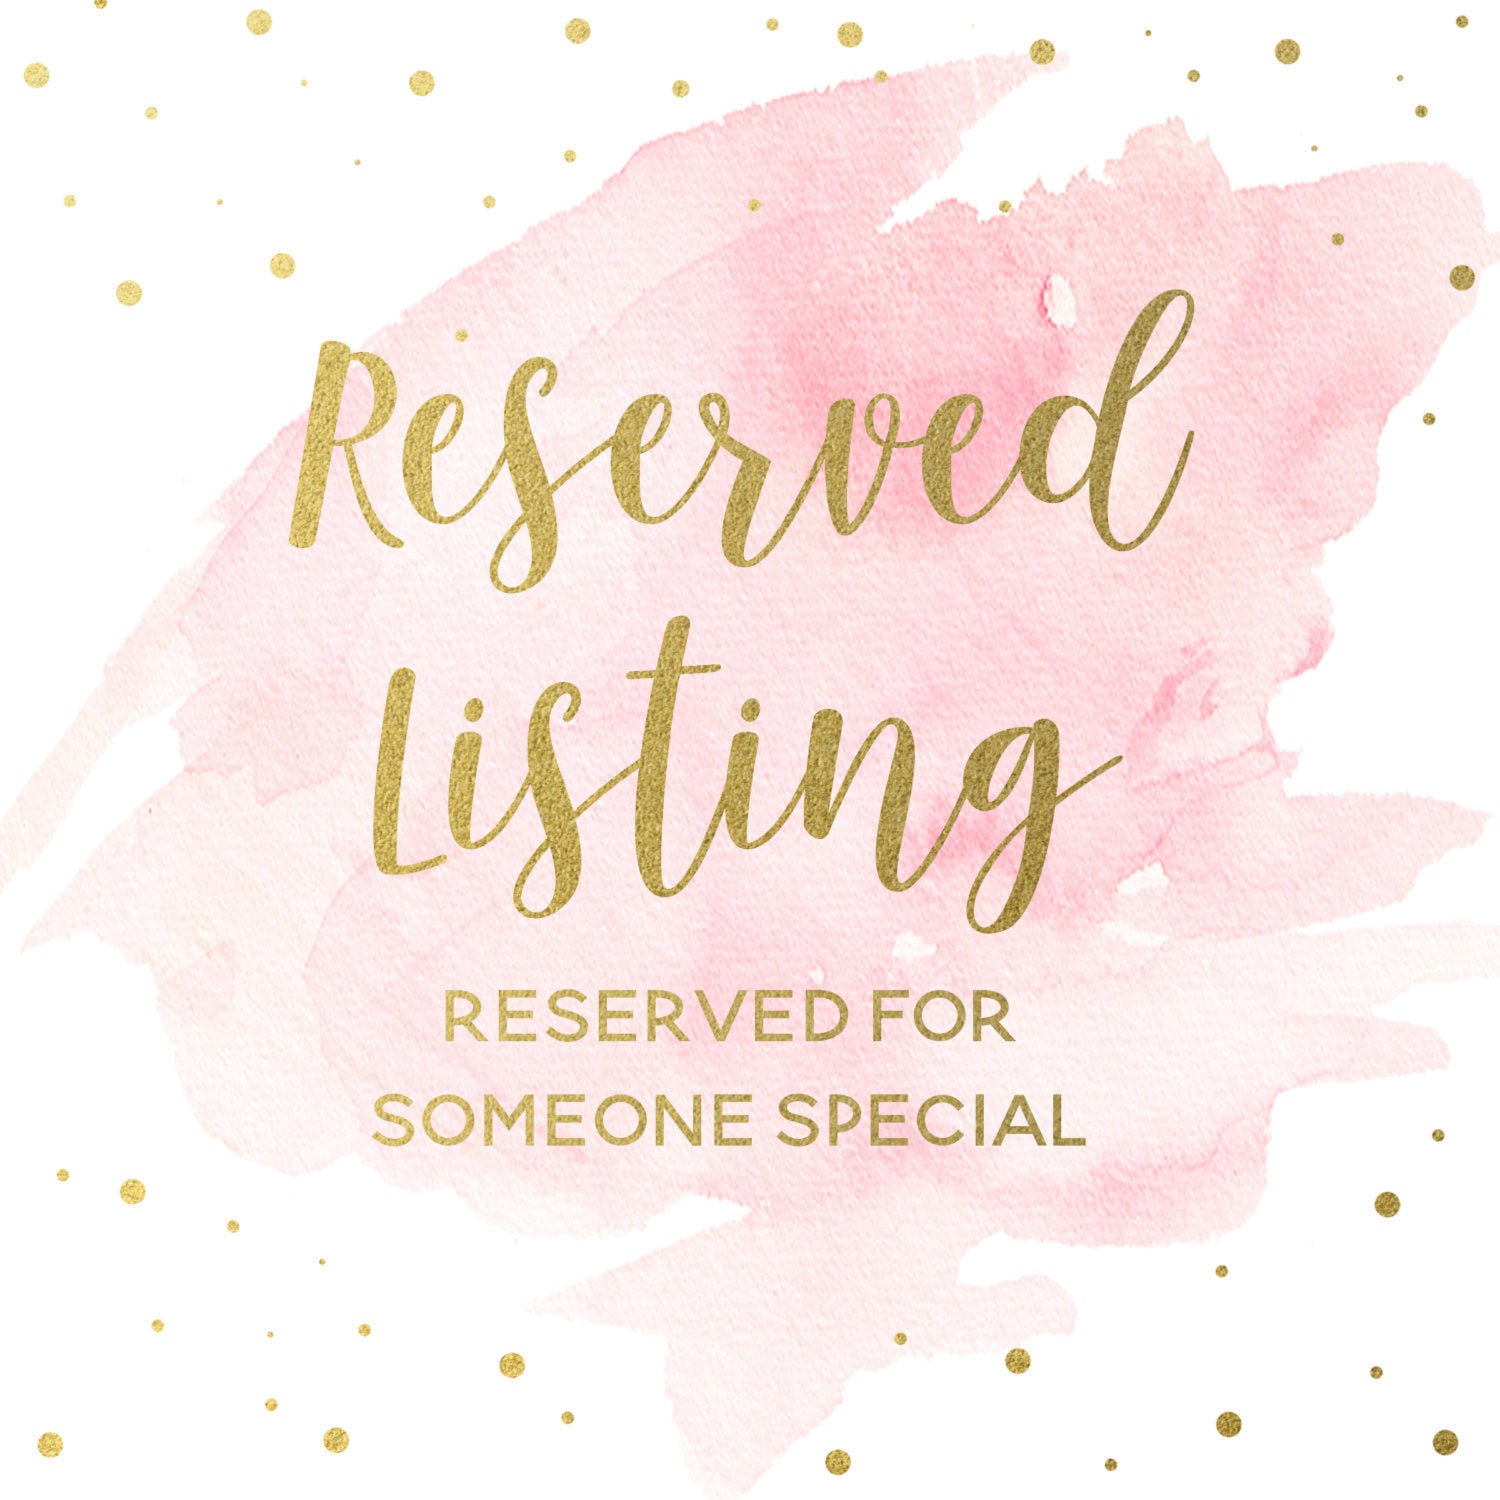 Reserved Listing - Ashley MaG.